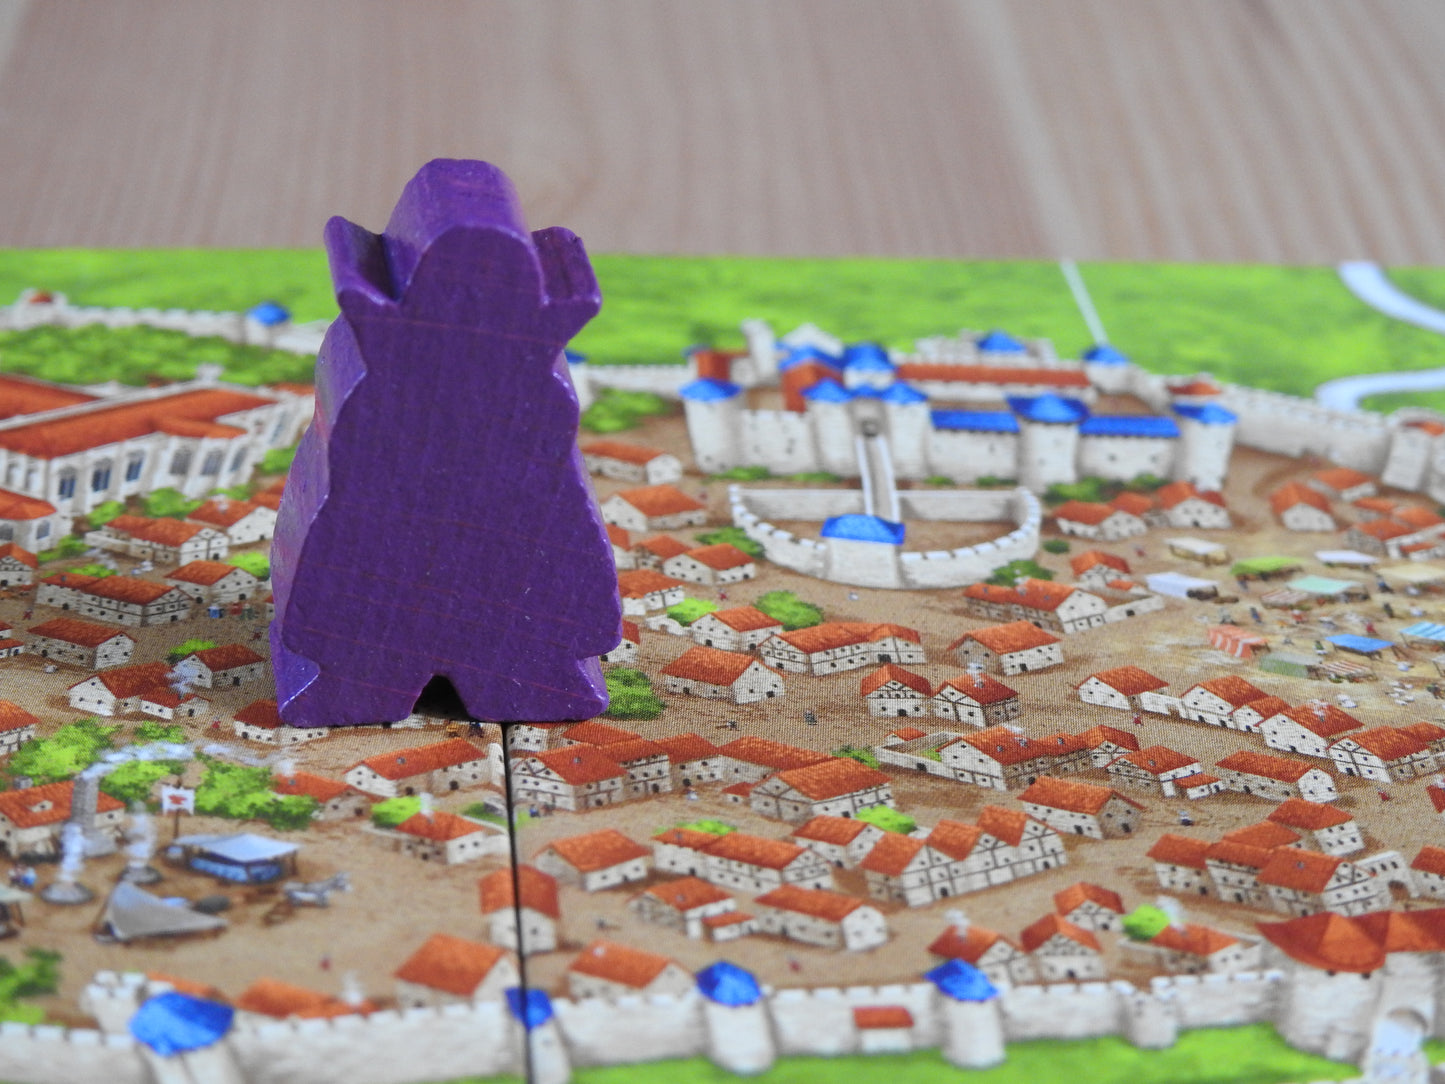 Close-up of the Count meeple figure stalking the streets of Carcassonne. Residents: beware!